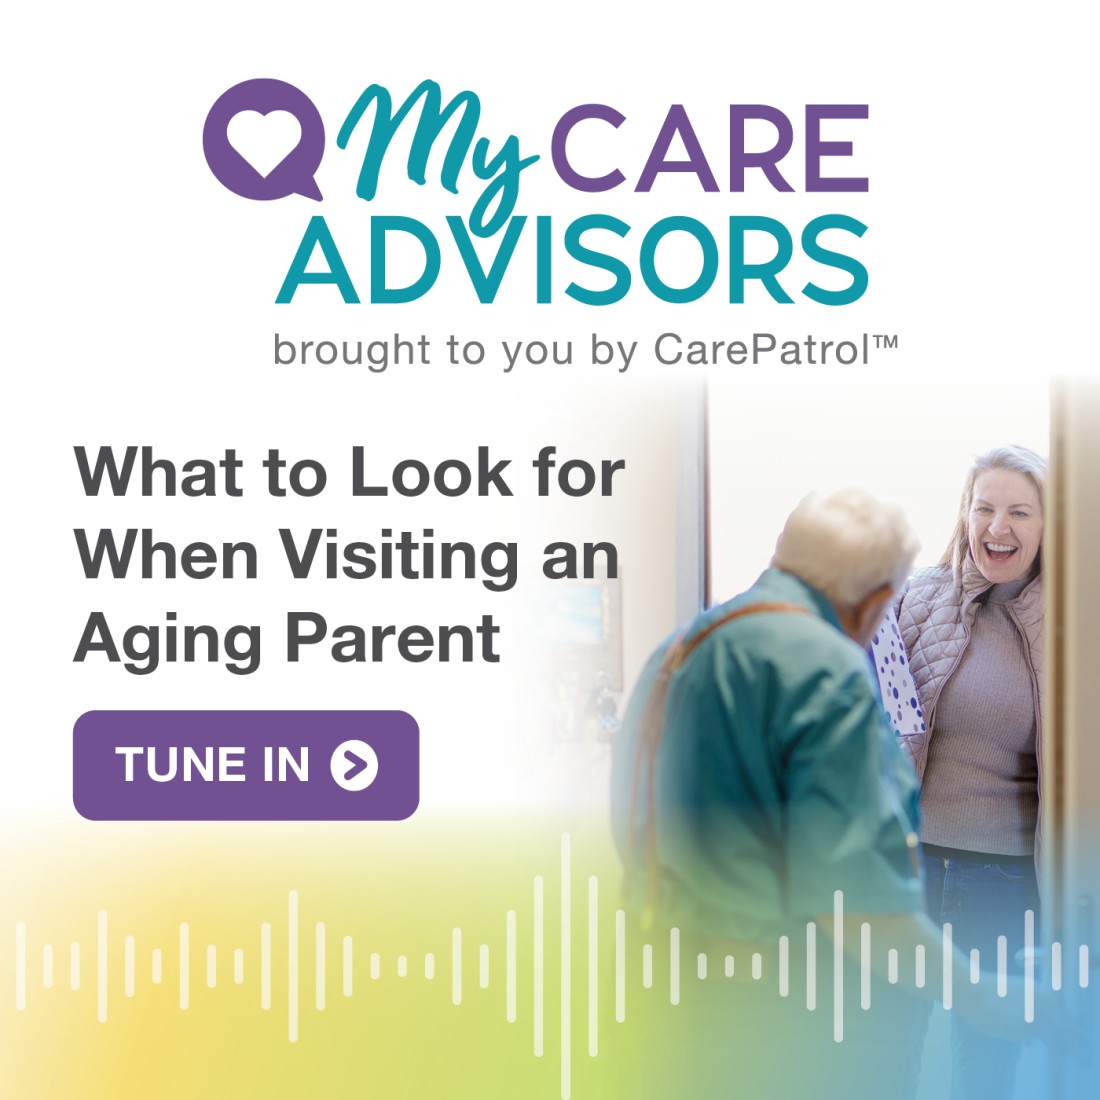 Senior Care Advisors Resources | Senior Care Solutions - Social_Media_Graphic__What_to_Look_for_When_Visiting_an_Aging_Parent